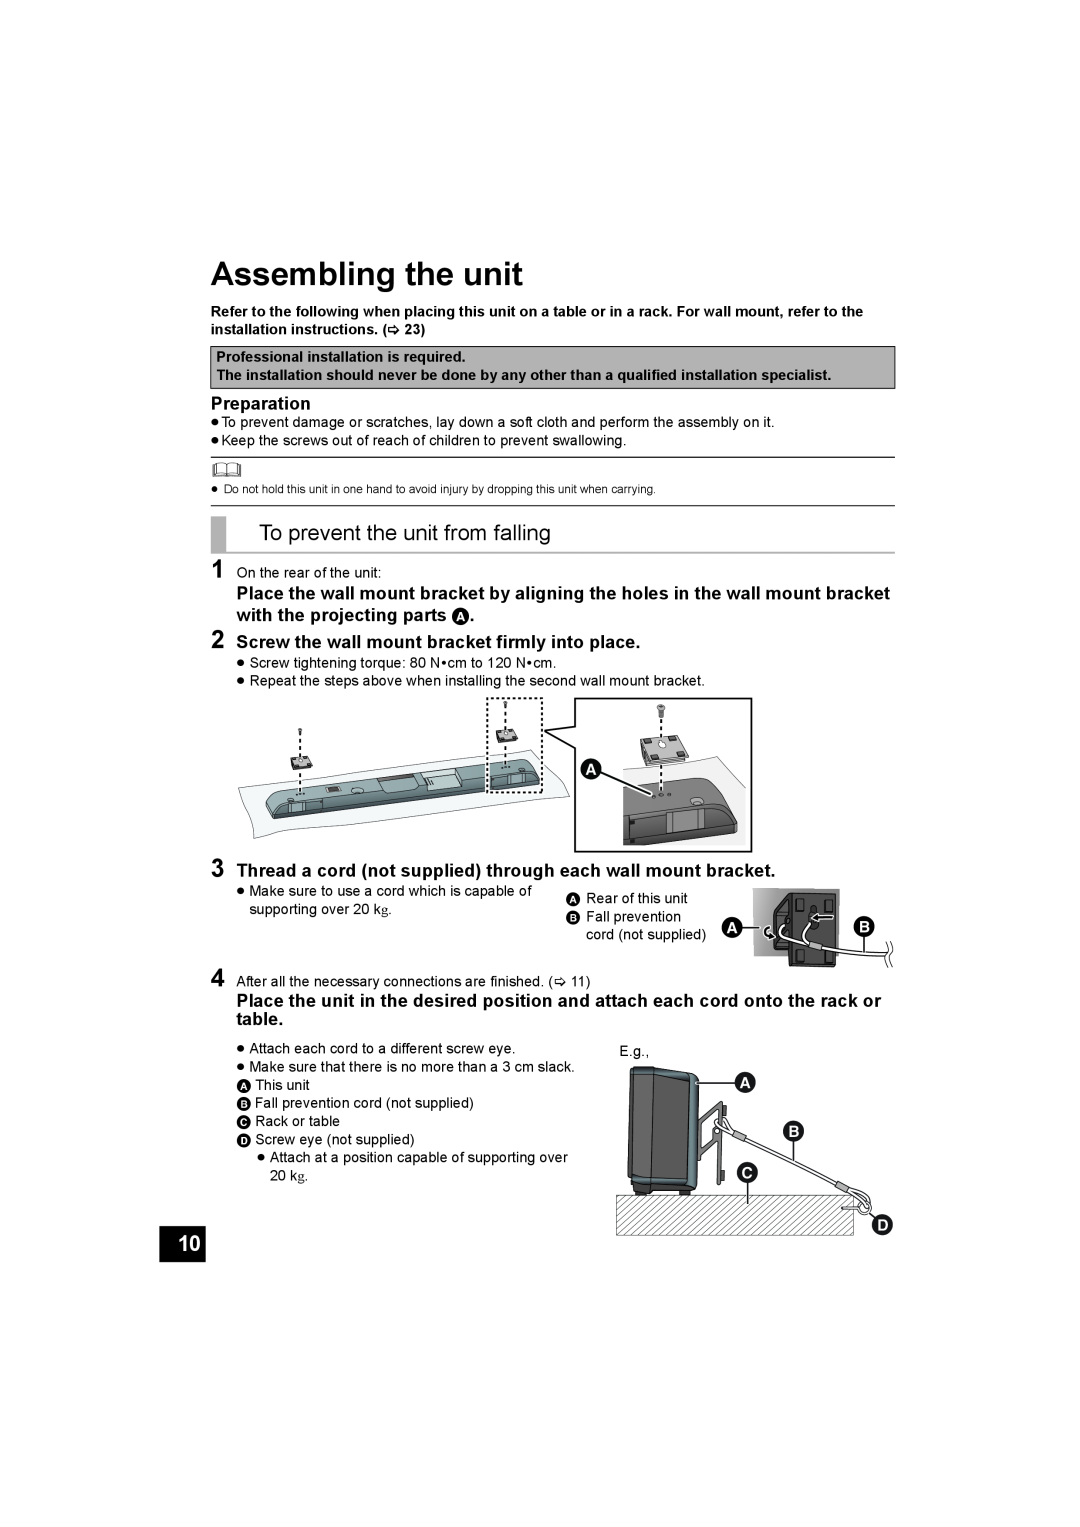 Panasonic SC-HTB500 operating instructions Assembling the unit, To prevent the unit from falling,    , Preparation 